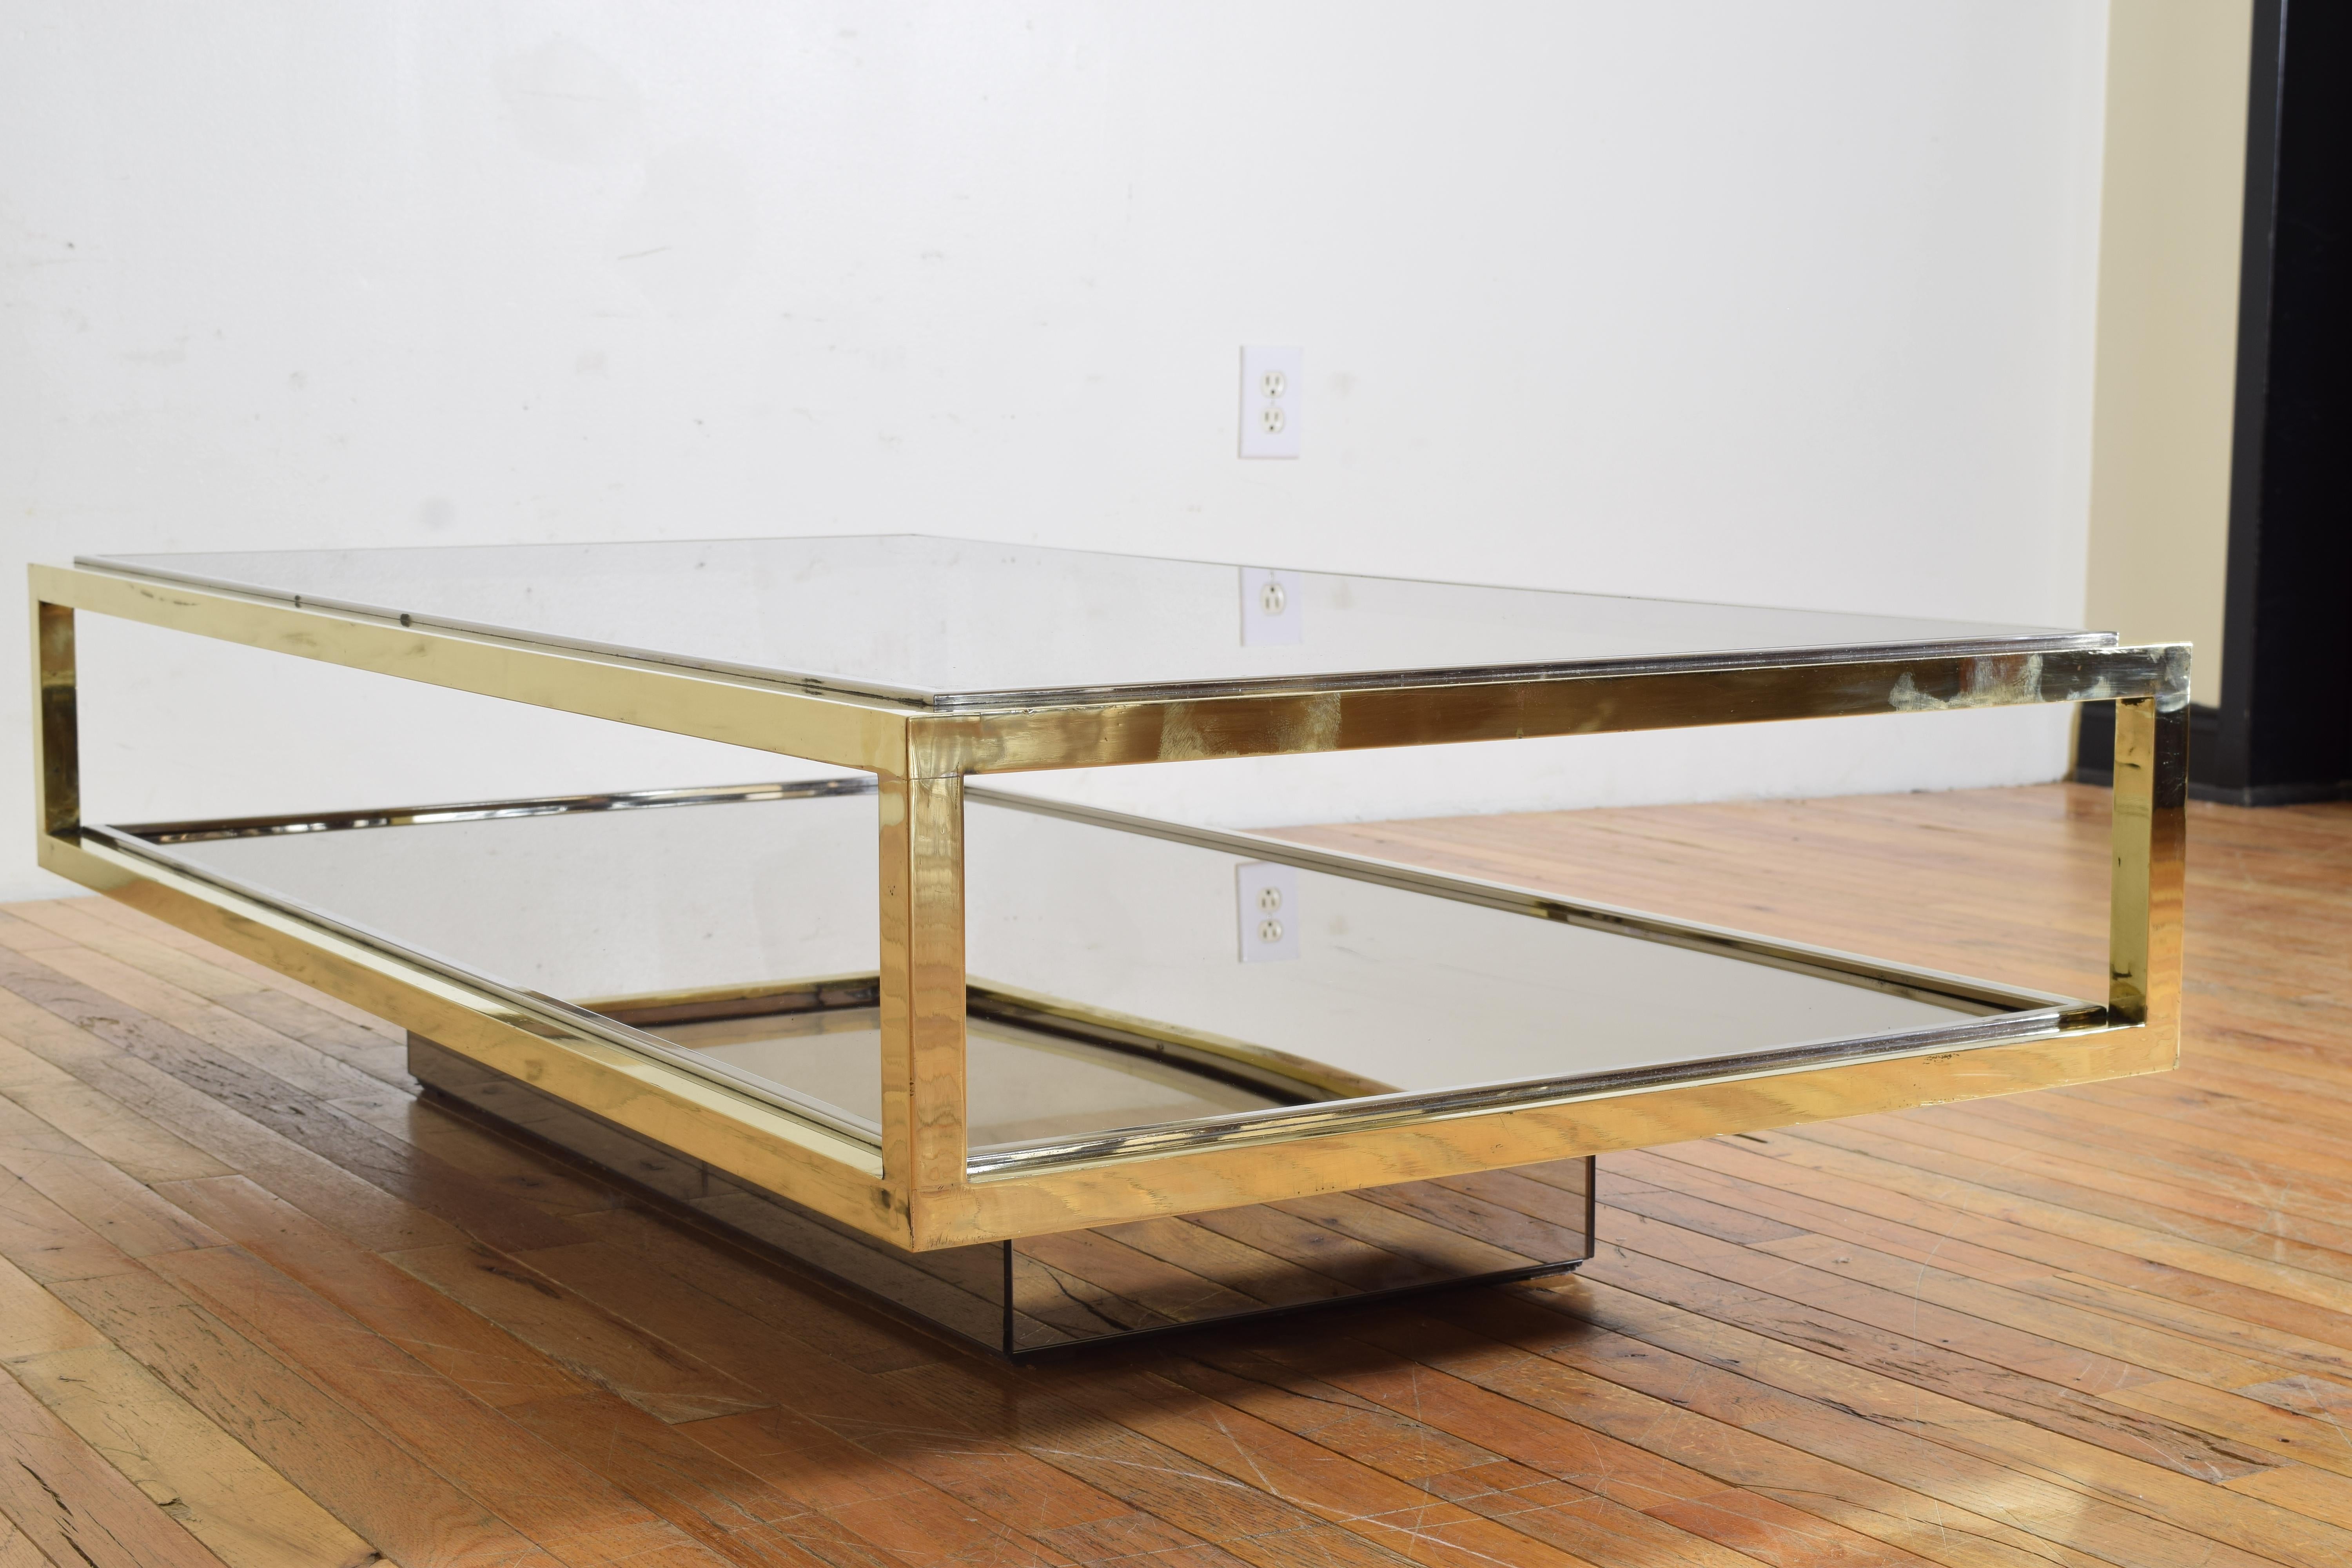 Late 20th Century Italian Brass, Chrome, Mirrored, & Glass Coffee Table, likely 1970’s For Sale